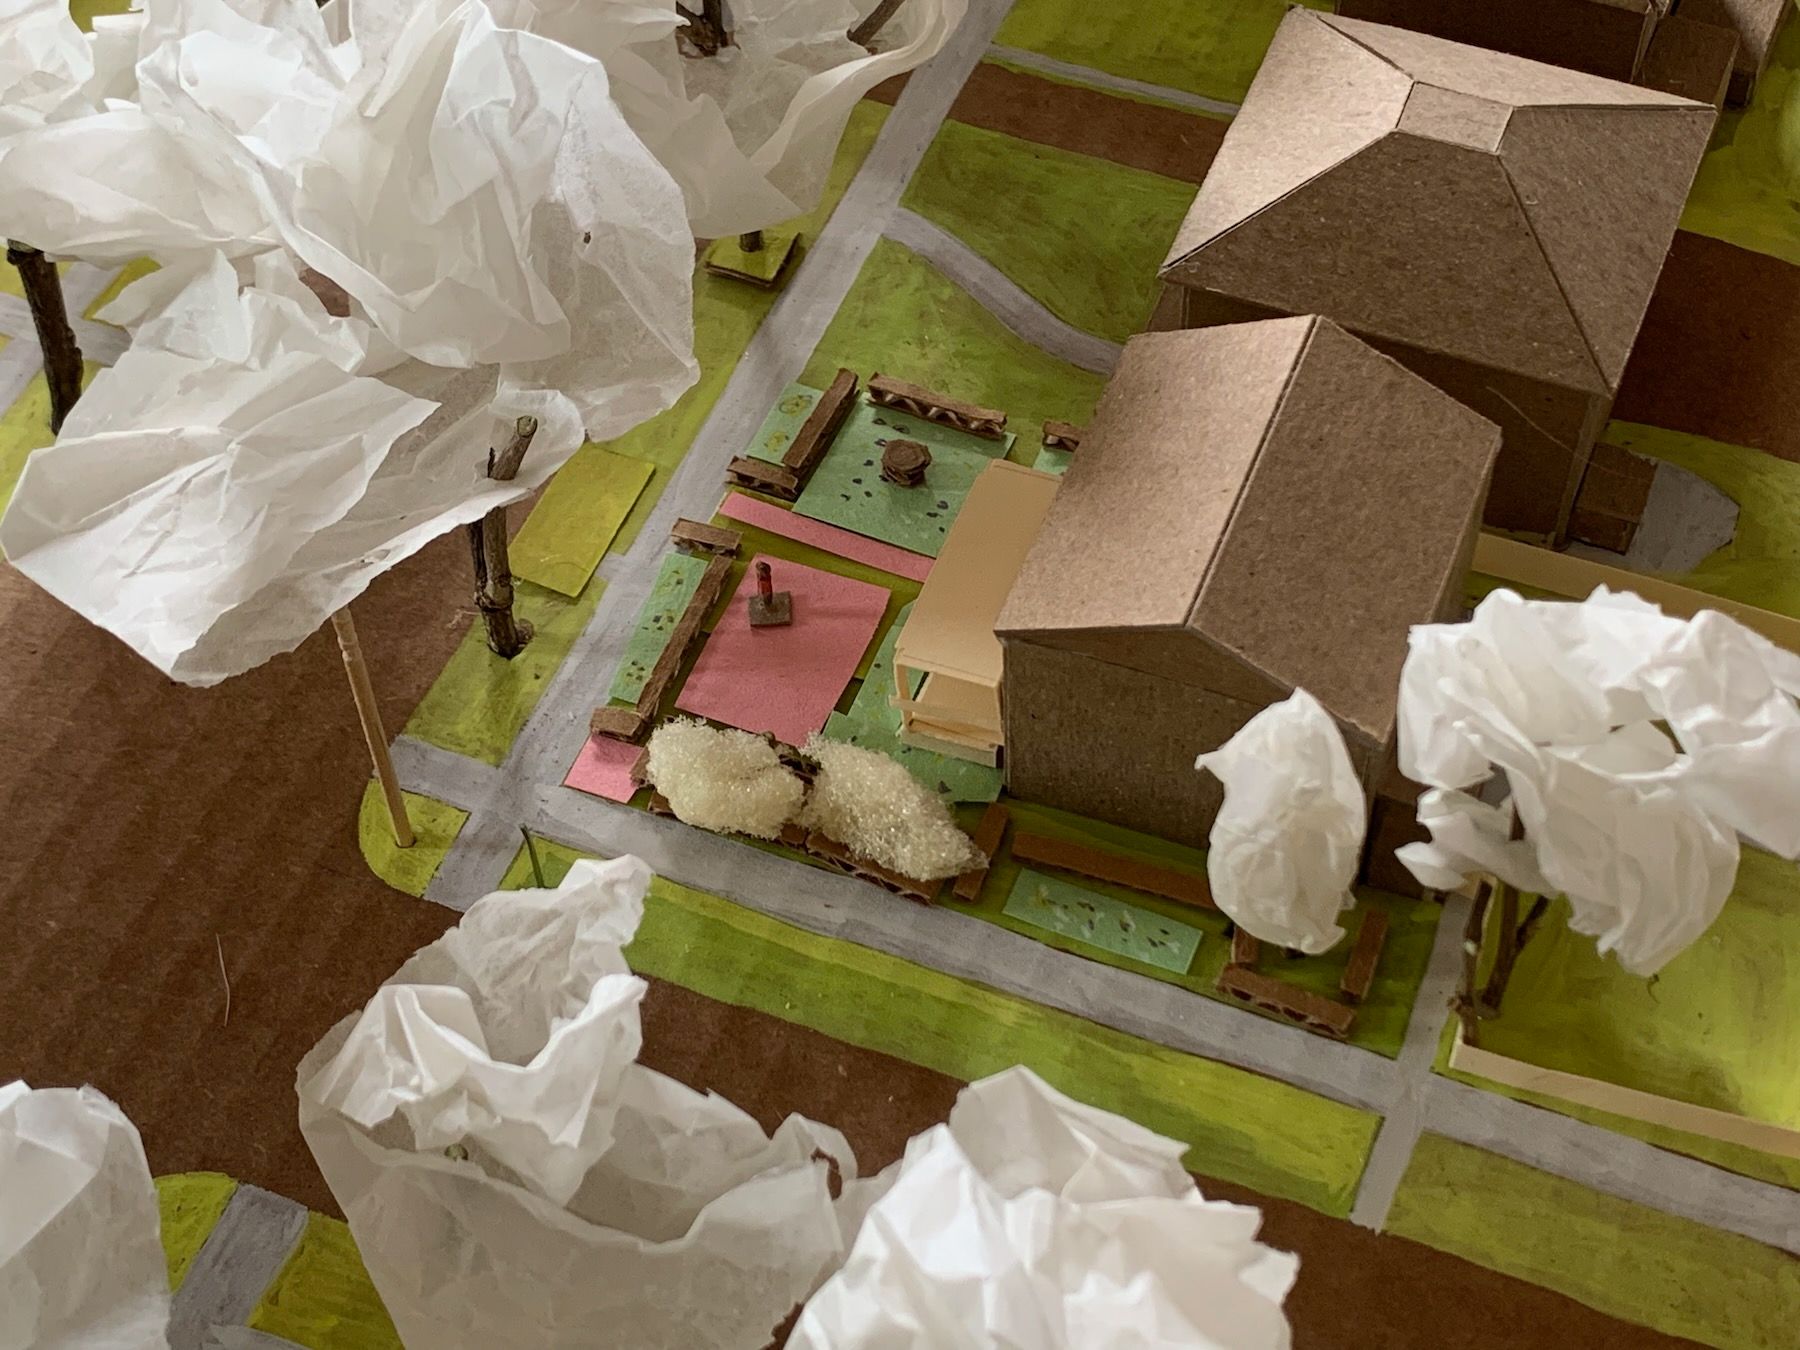 Front yard design with construction paper, cardboard, on 1:200 scale model of neighborhood